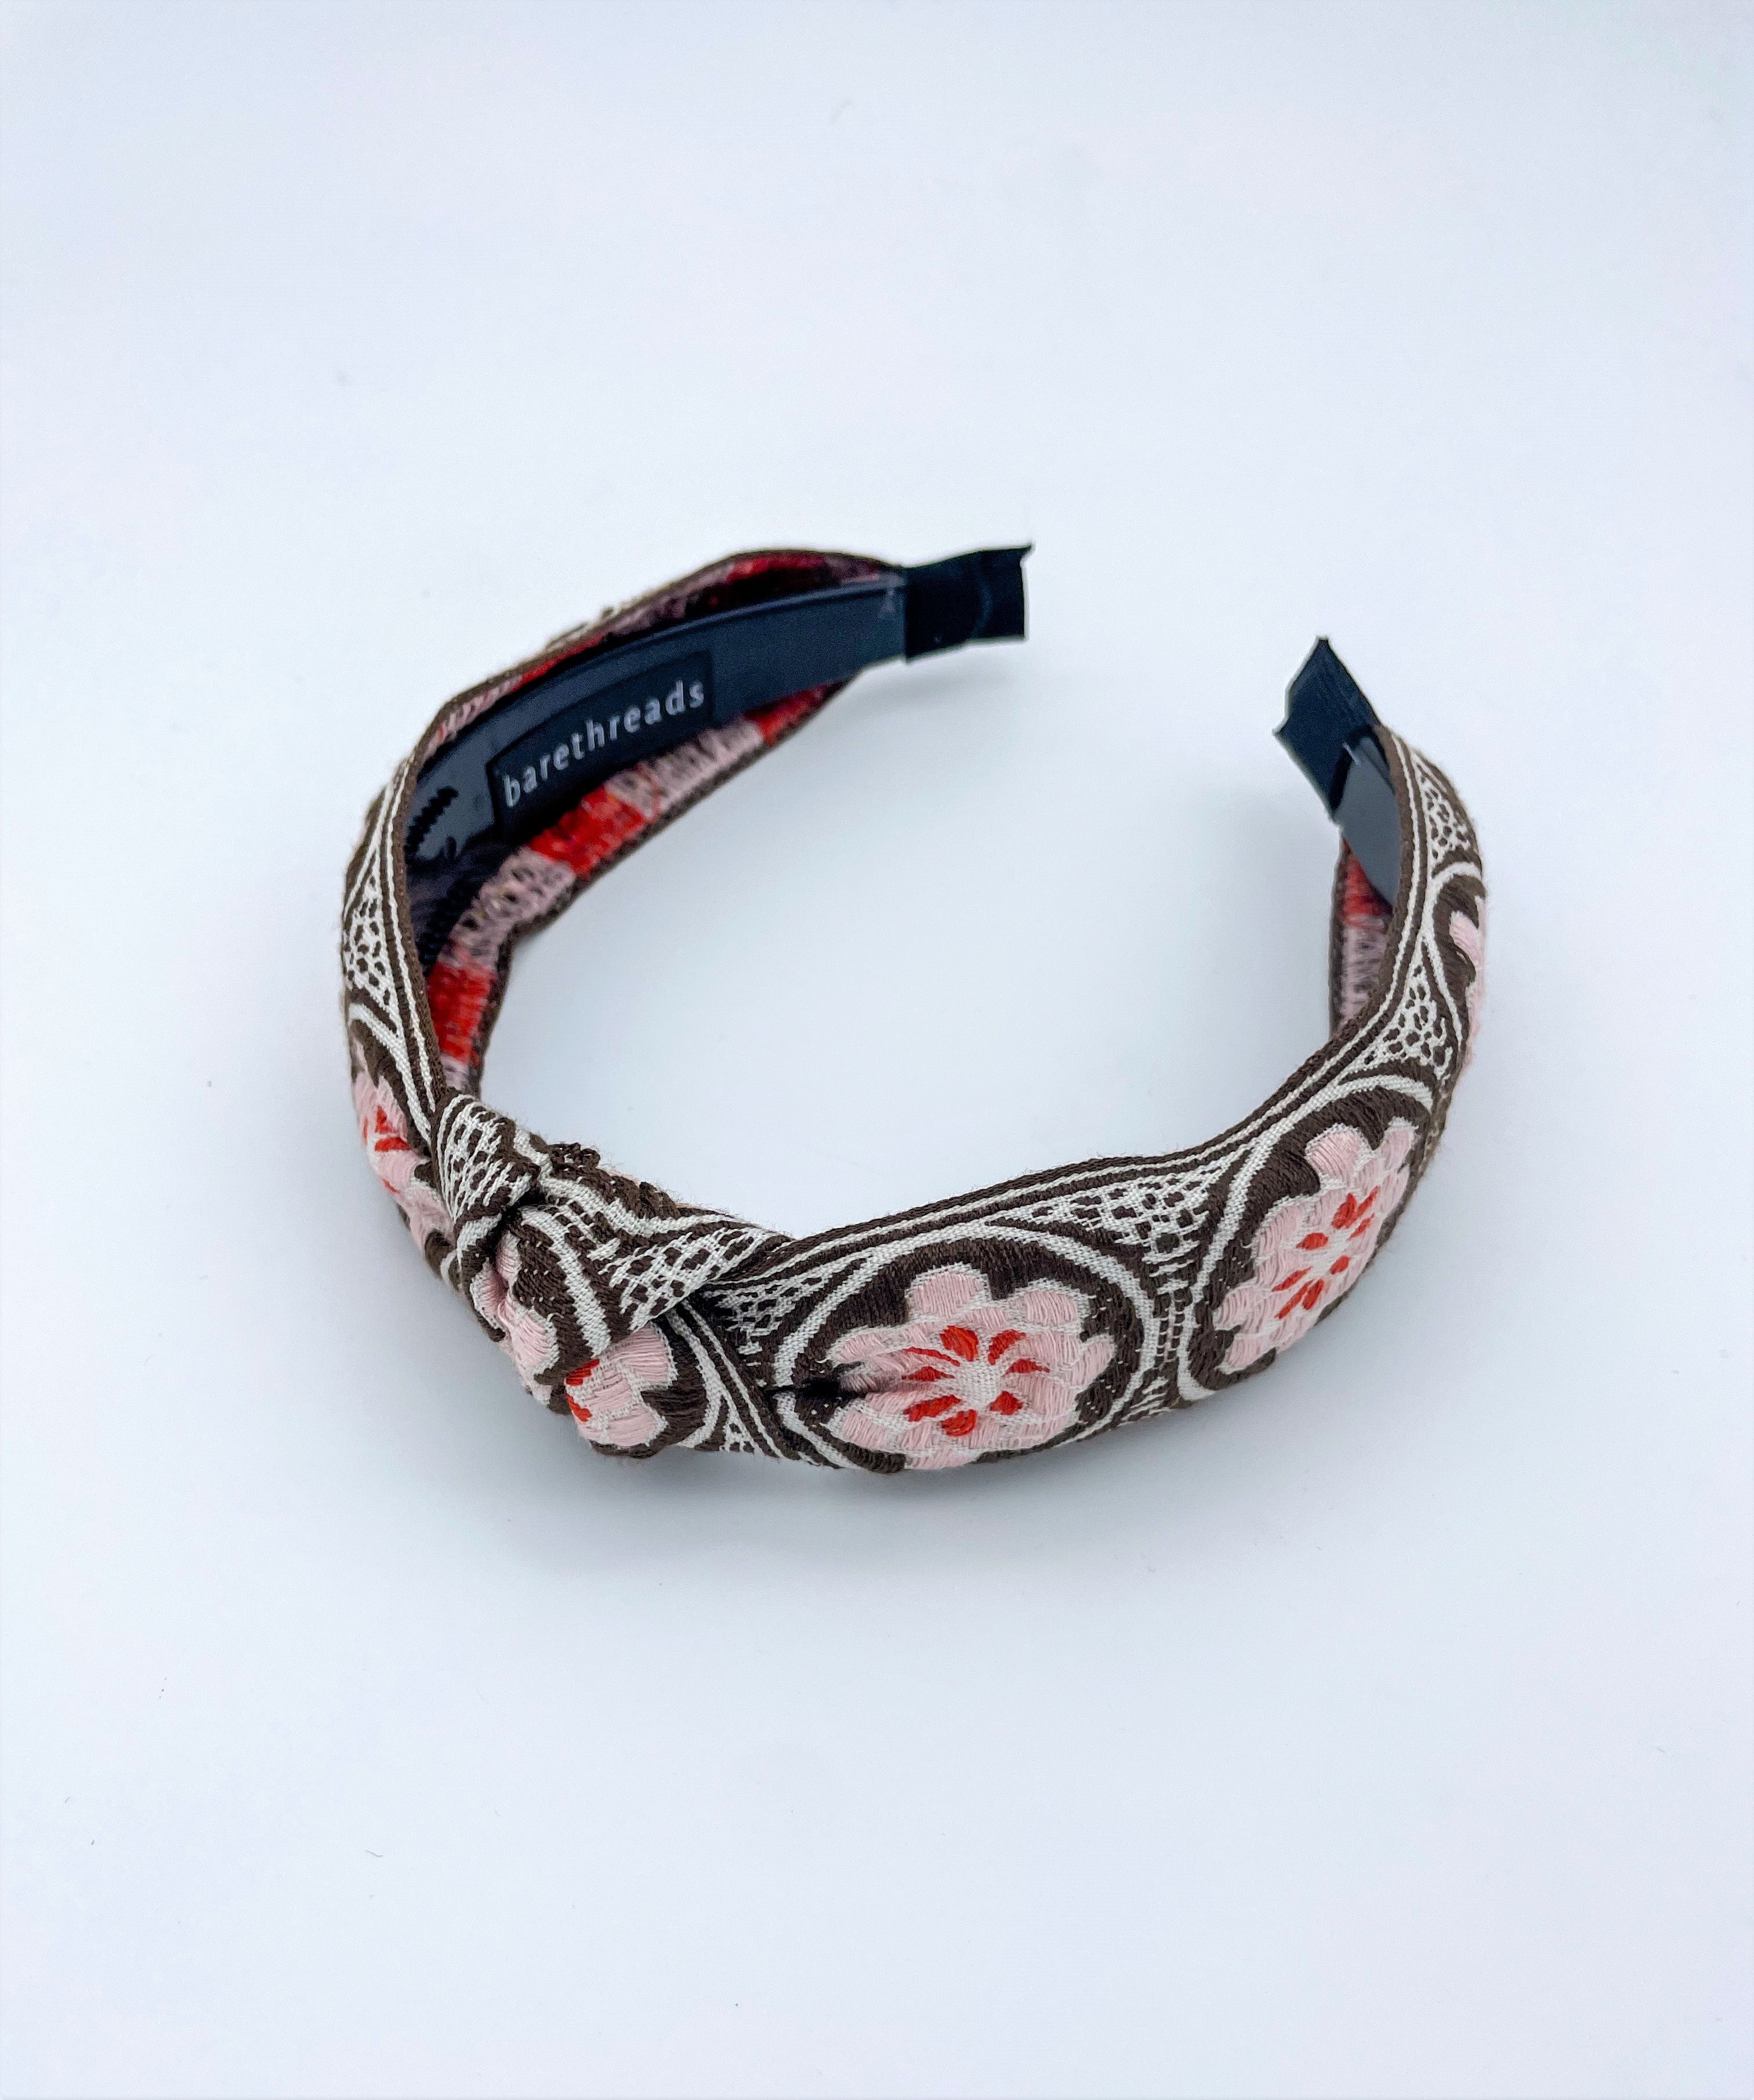 THE LOTUS EMBROIDERED BAND